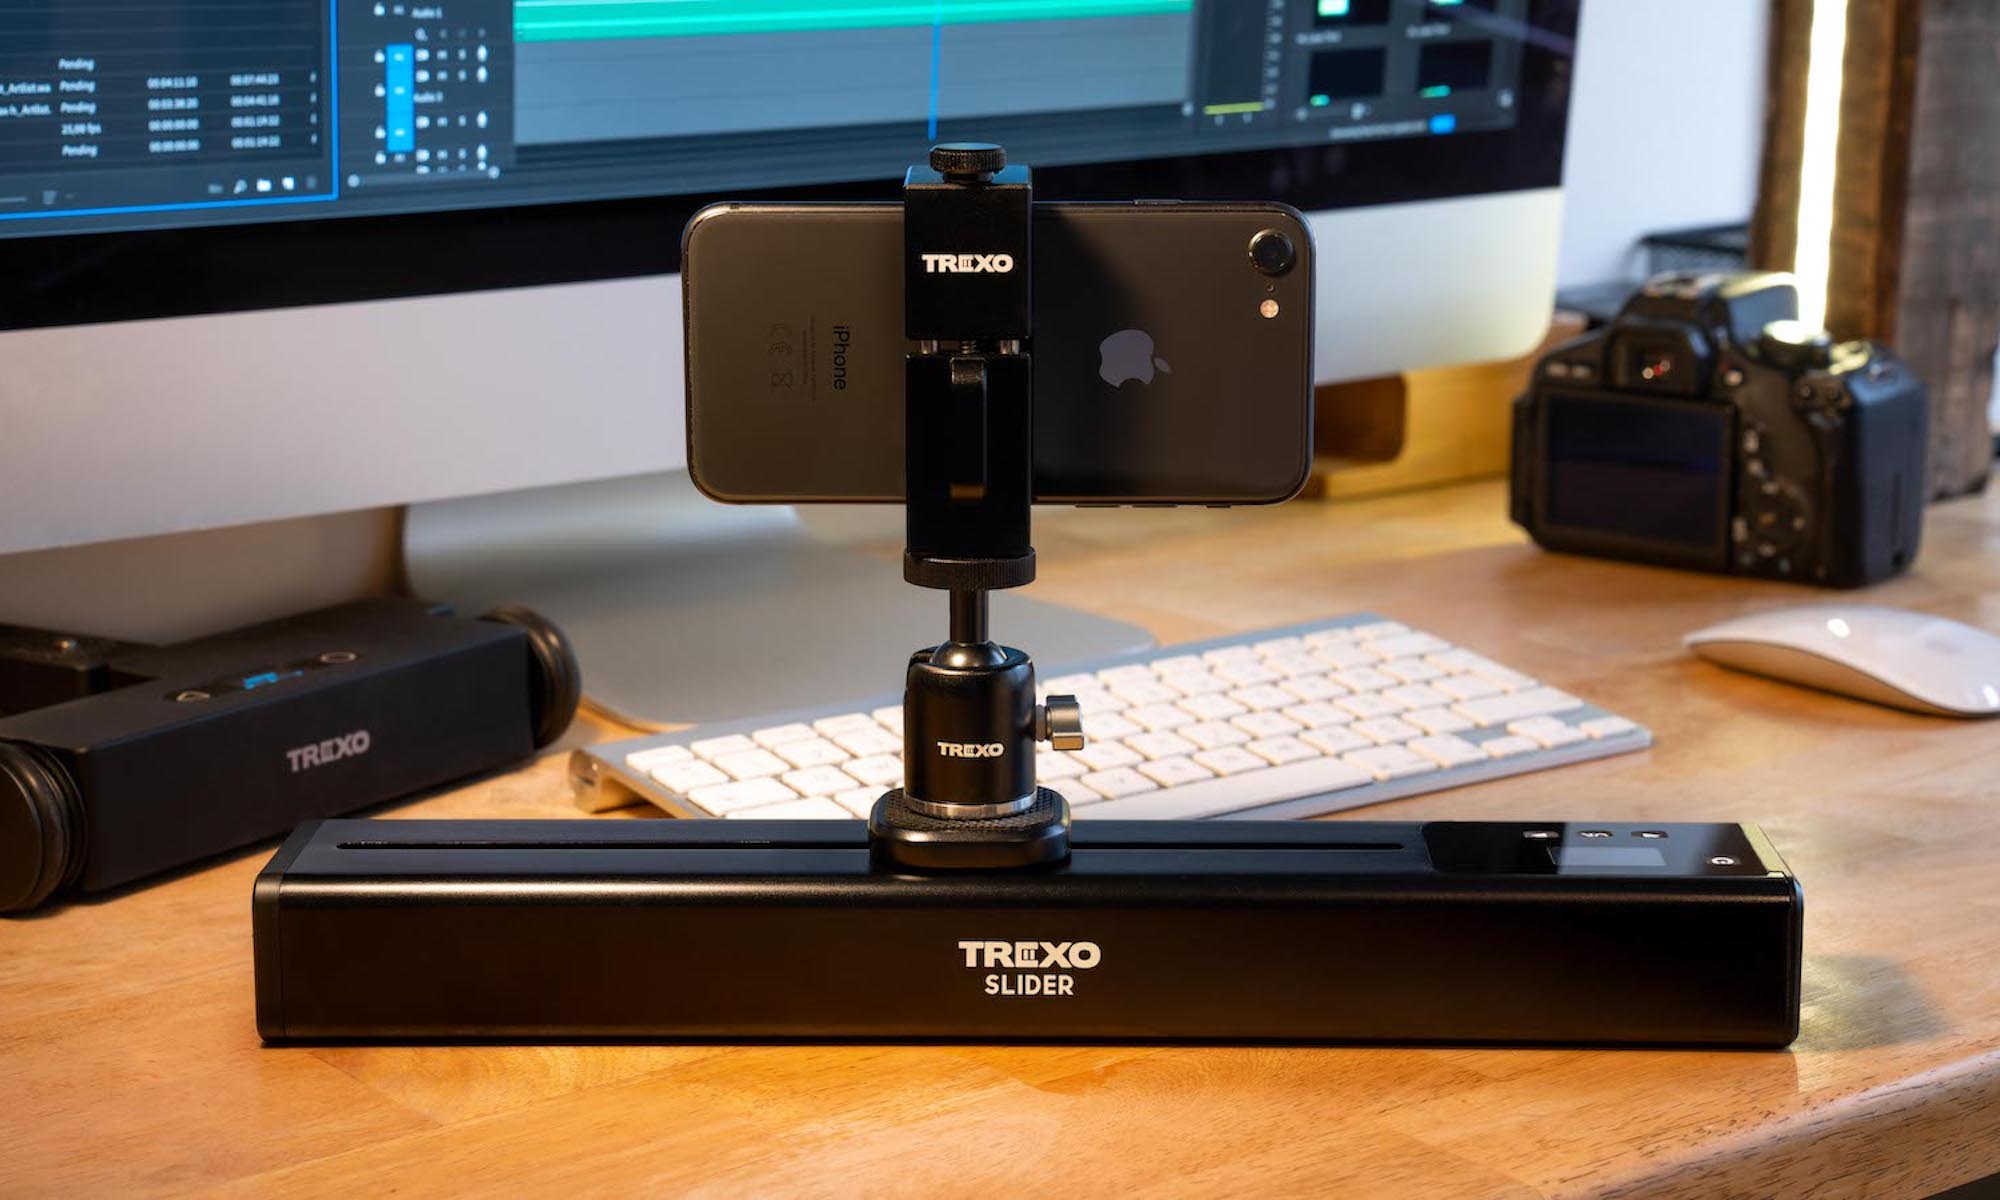 The Trexo Slider helps you capture smooth shots without any jumps or vibrations